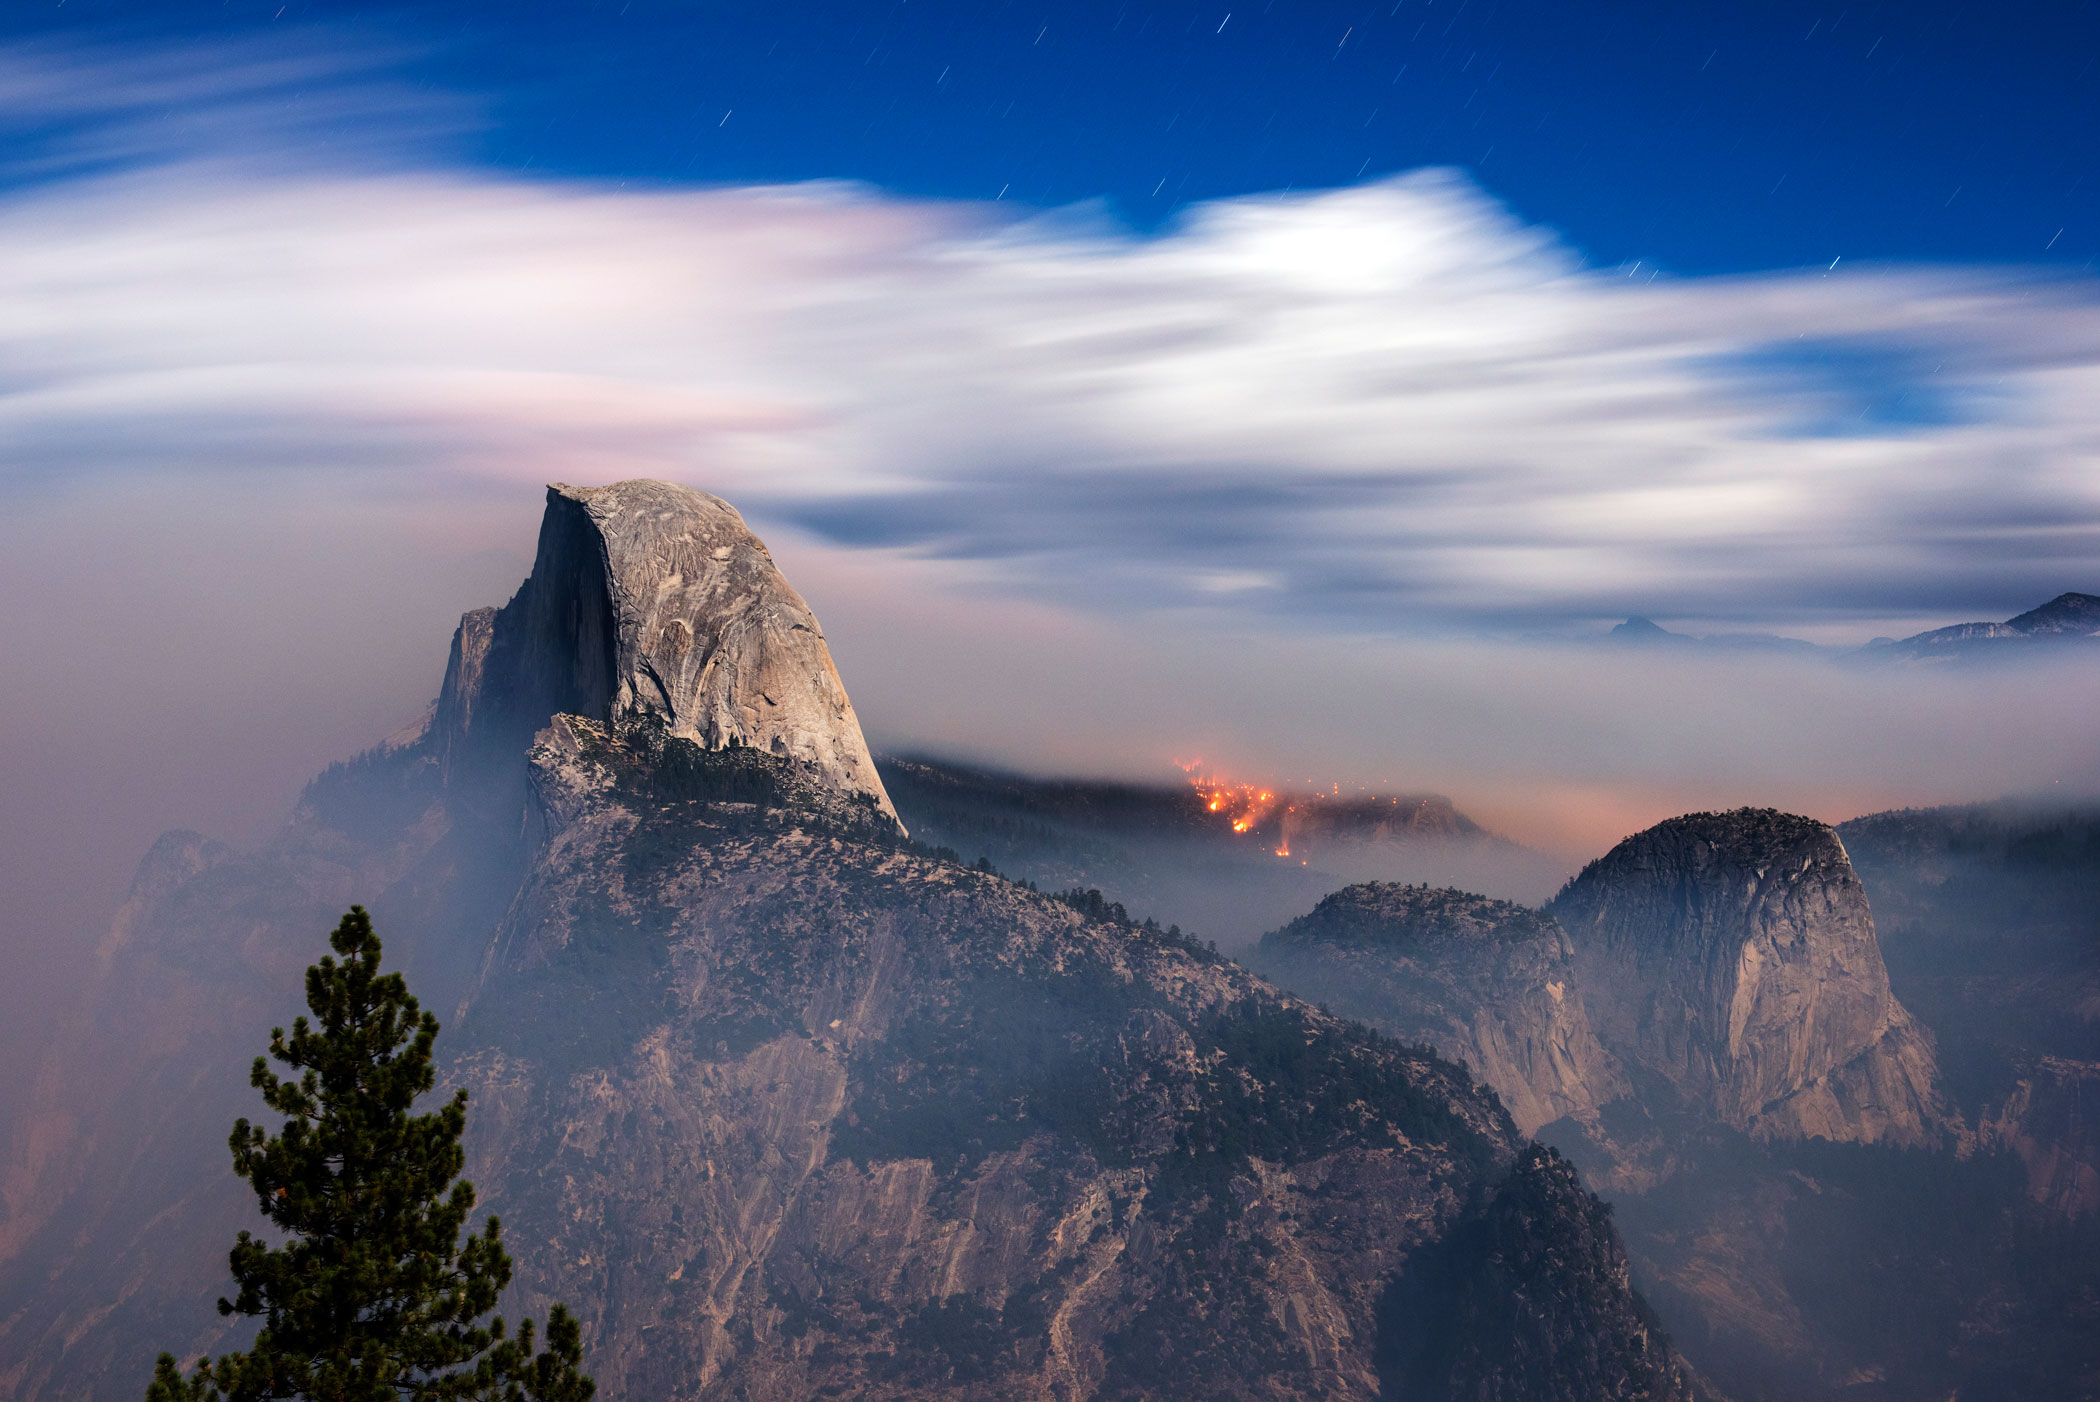 The Meadow Fire burns overnight near Half Dome in Yosemite National Park early Monday September 8, 2014. As of Wednesday the fire had burned over 4,500 acres and was 10% contained.